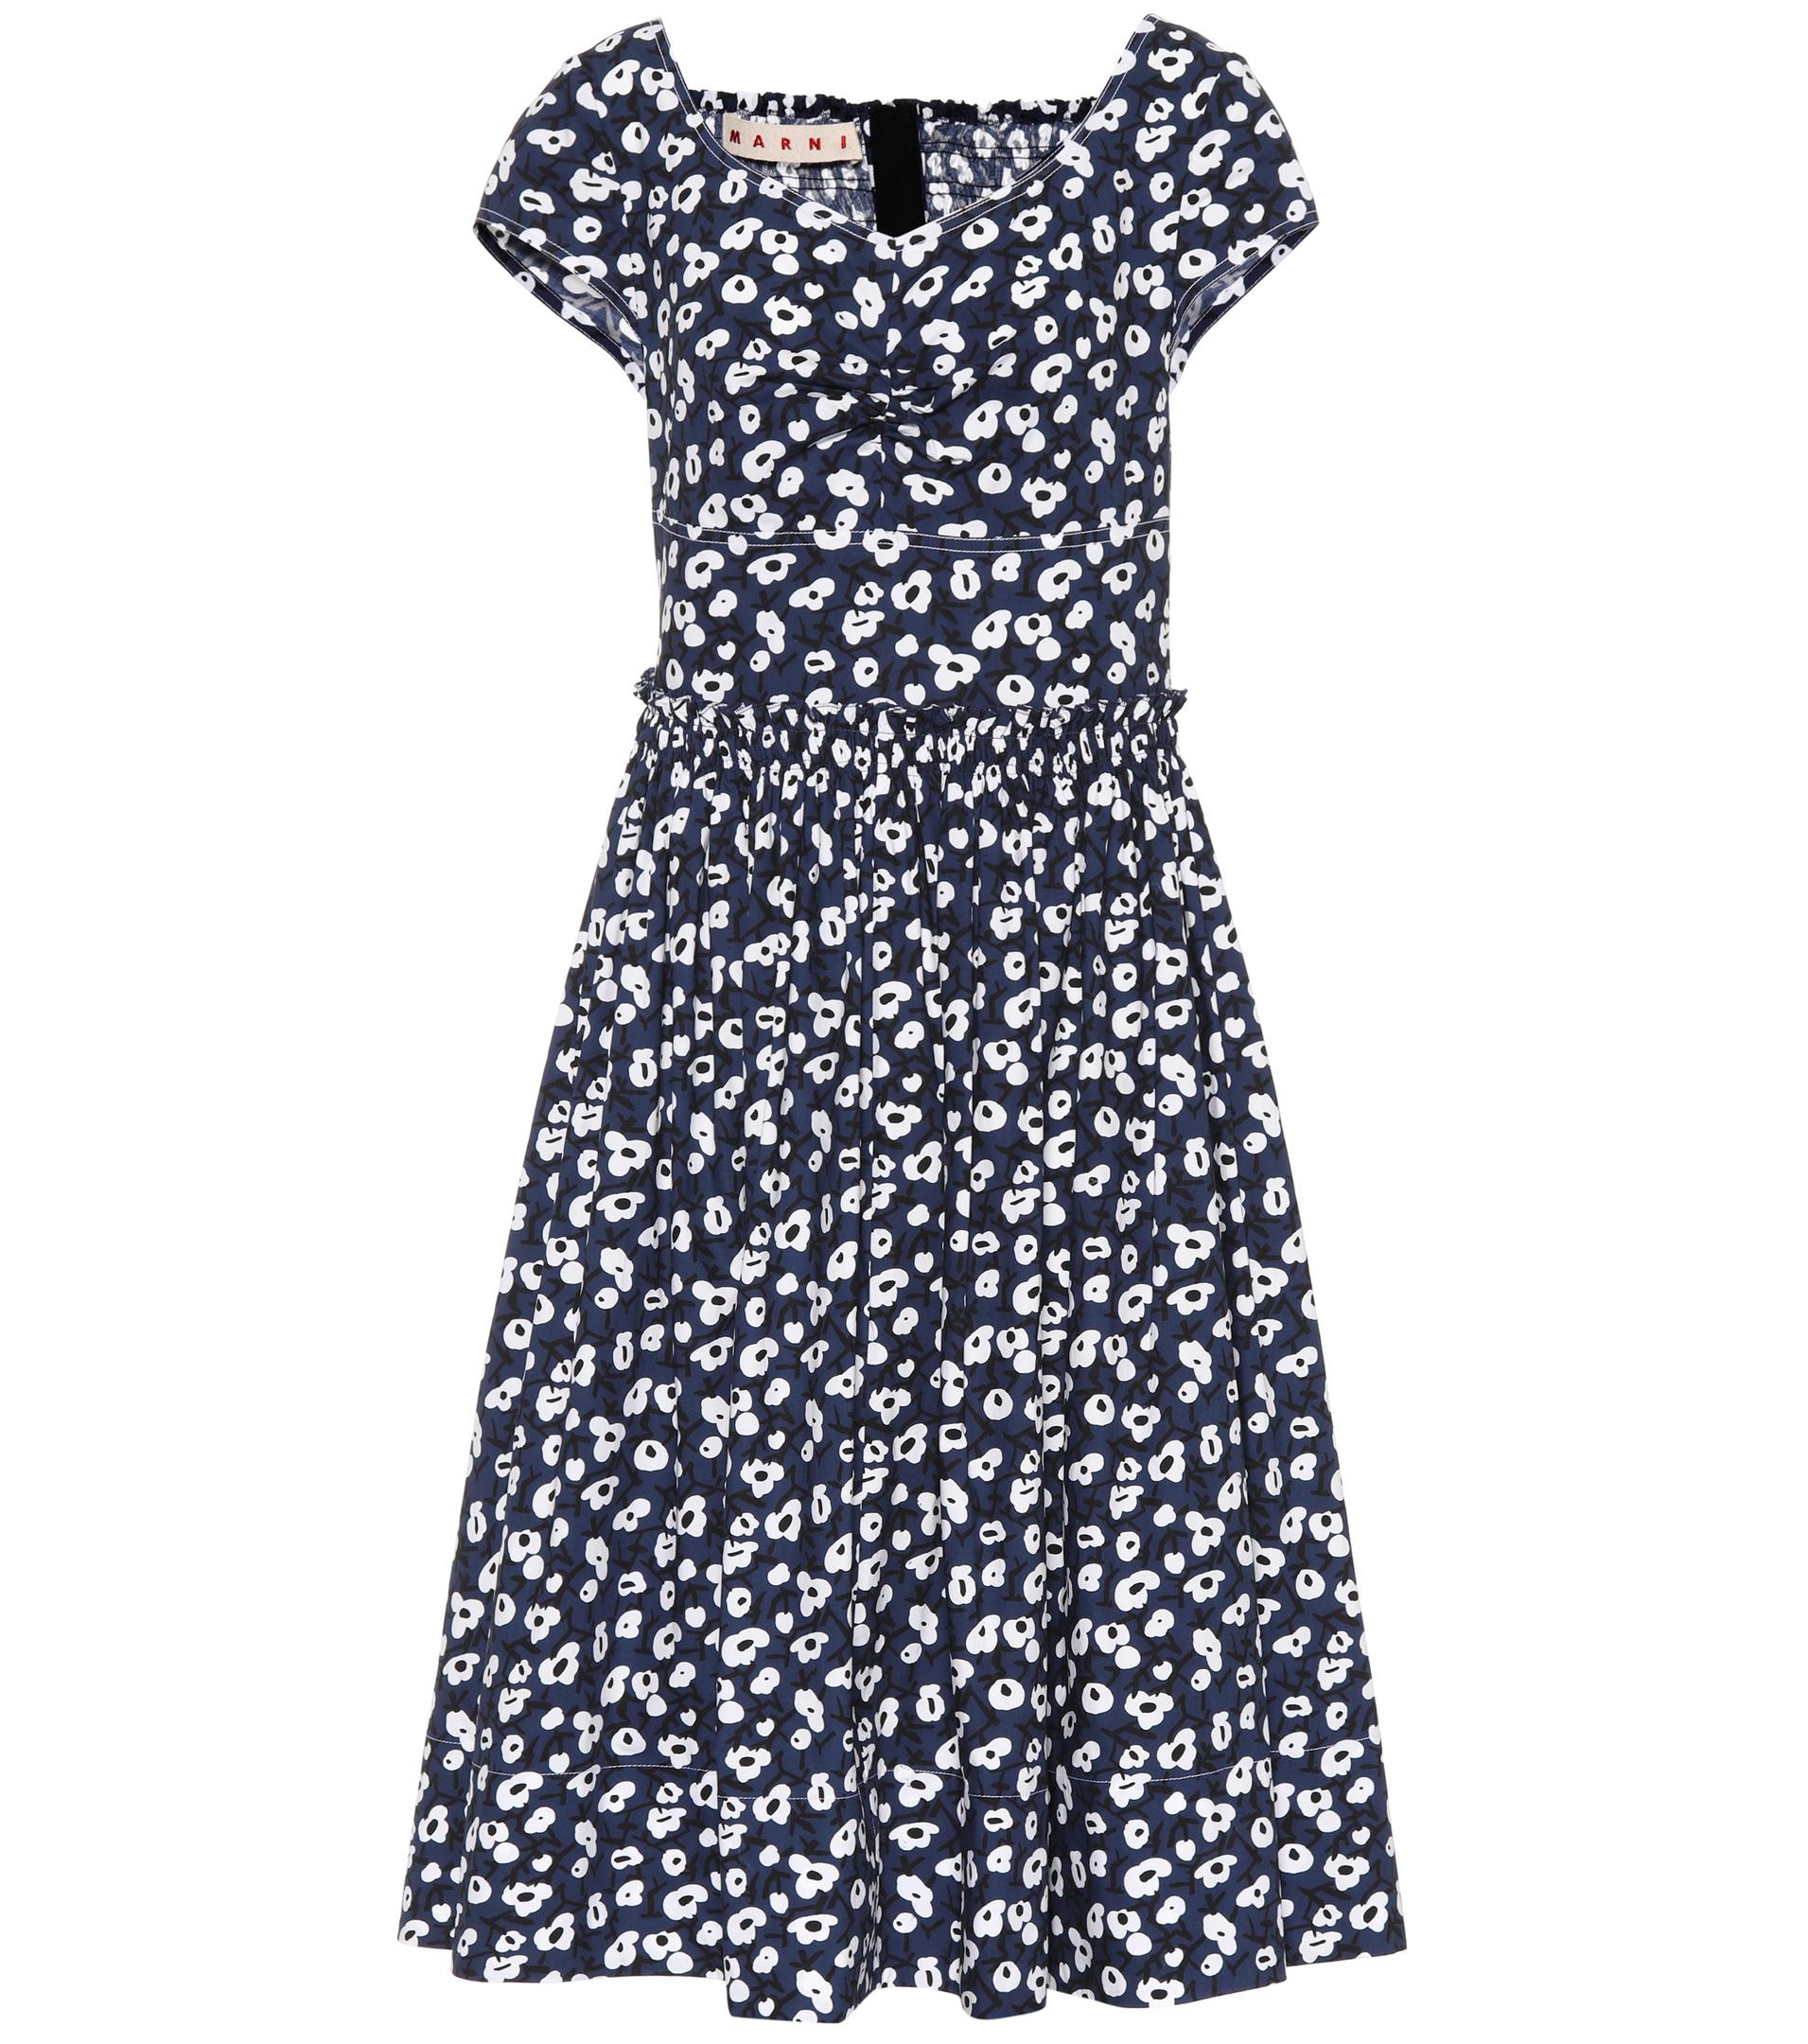 Marni Floral-printed Cotton Dress in Blue - Lyst